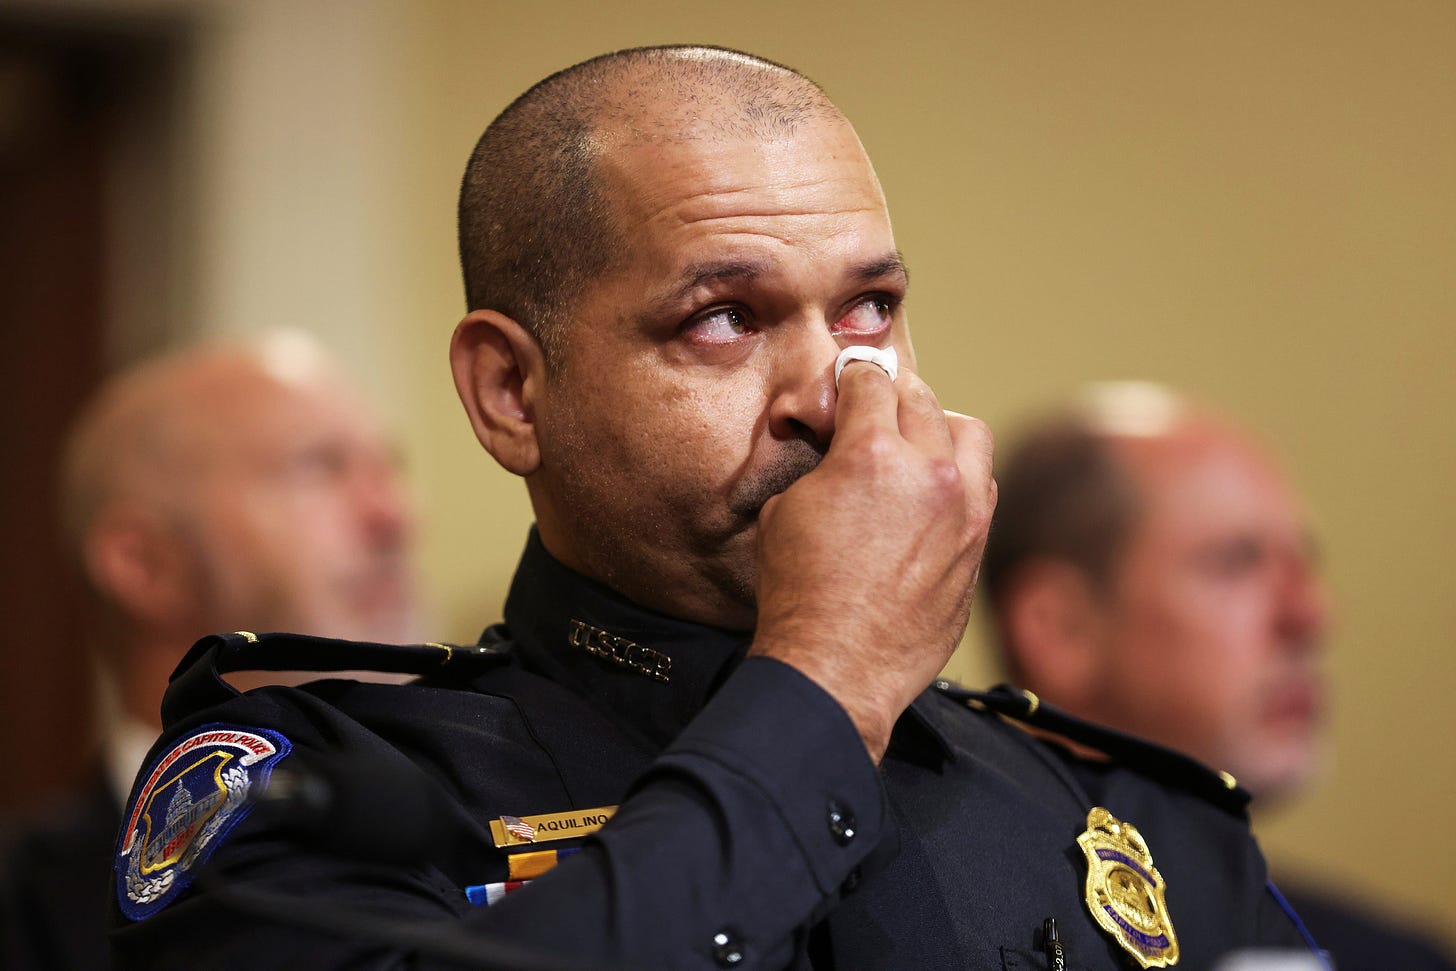 Latino officer tearfully describes devotion to defending Capitol during  Jan. 6 attack